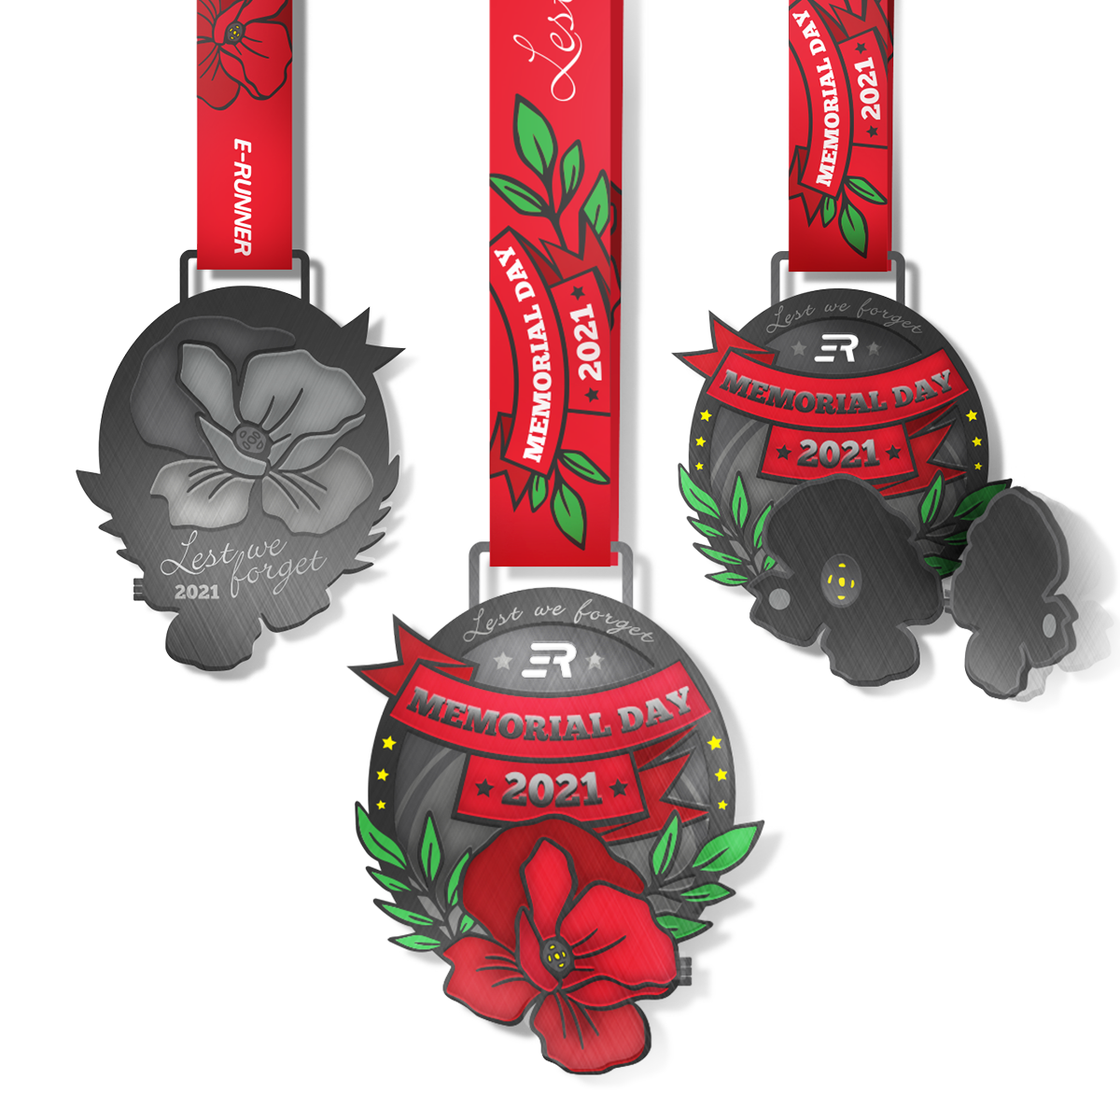 SPECIAL OFFER: Stunning Medal + Official T-Shirt | Memorial Day Marathon 2021 | May 29-30th